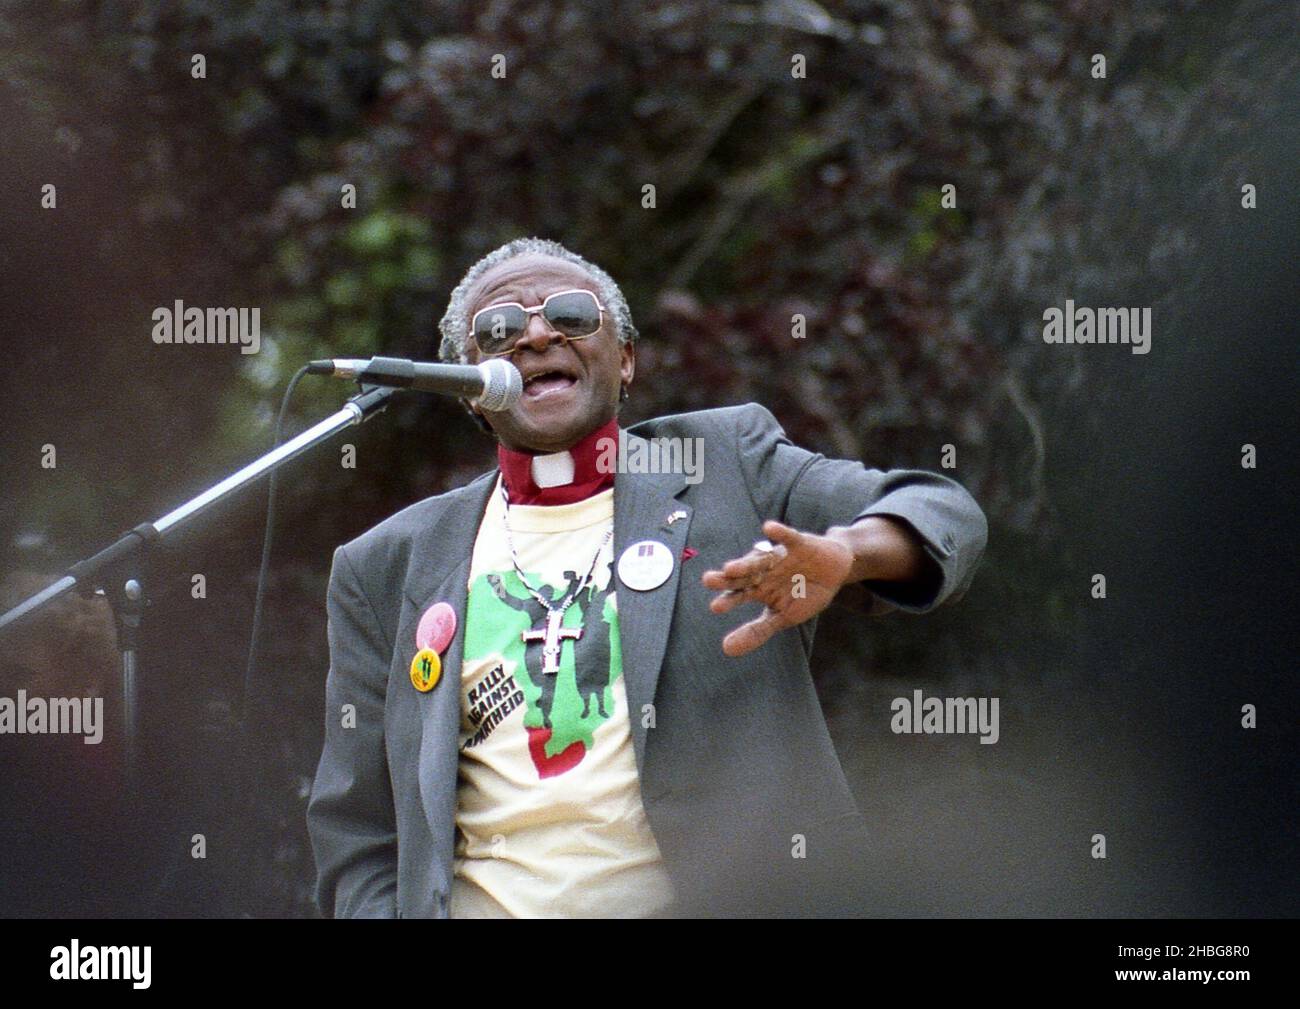 On 31st May 1986, the then Bishop Desmond Tutu addressed a crowd in Queens Park, Toronto after a march of about 10,000 people as part of the Toronto Arts Against Apartheid Festival Foundation. He arrived in Canada  two years after he received the Nobel Prize for Peace. Stock Photo